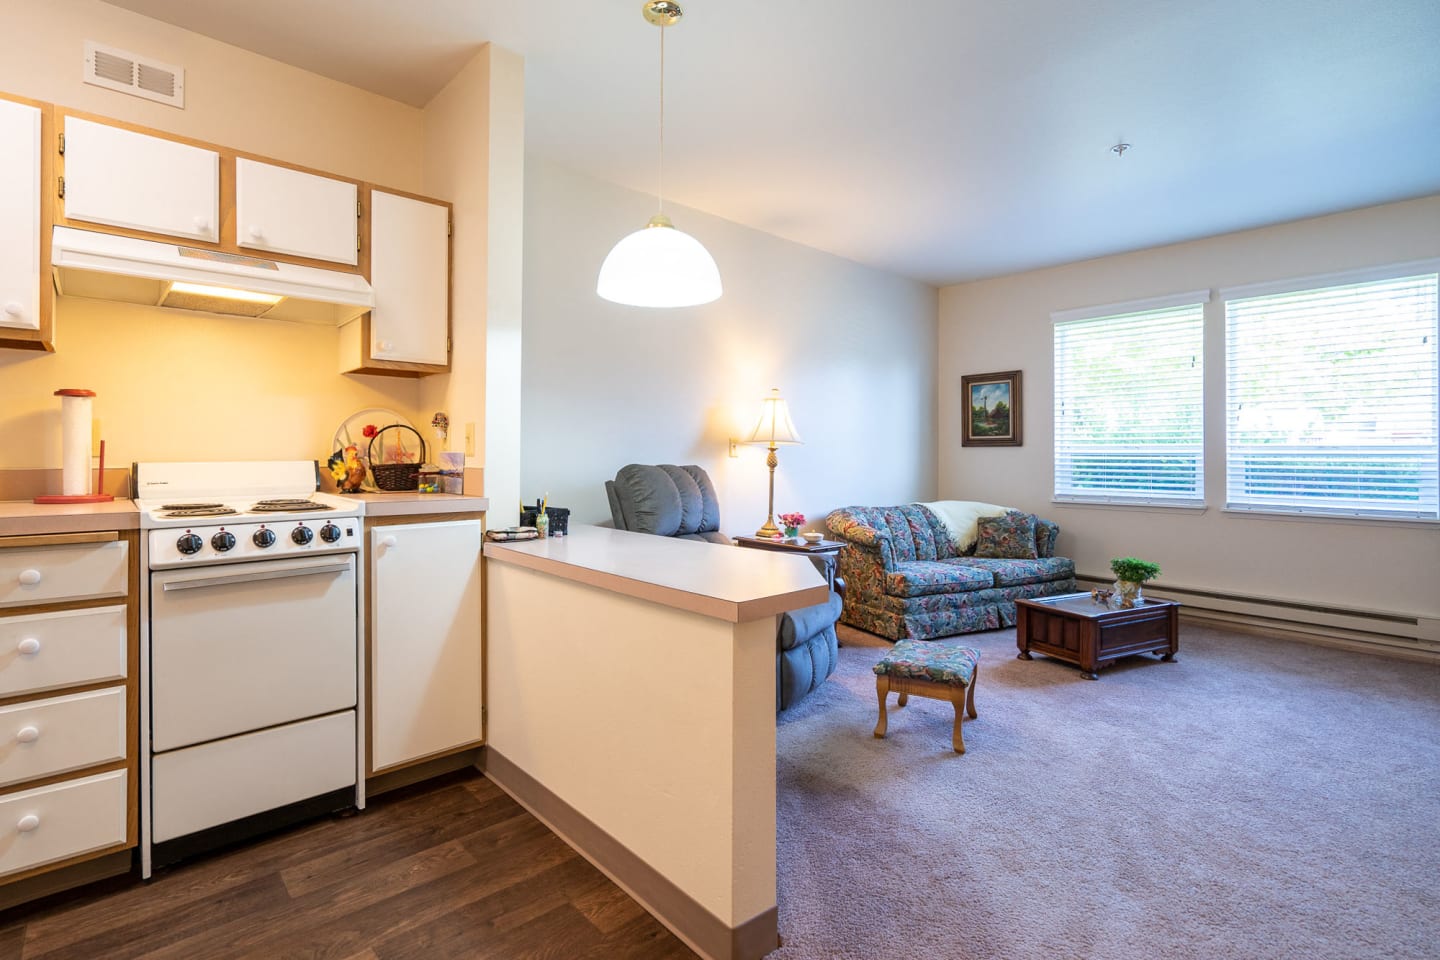 DISCOVERY VIEW RETIREMENT APARTMENTS